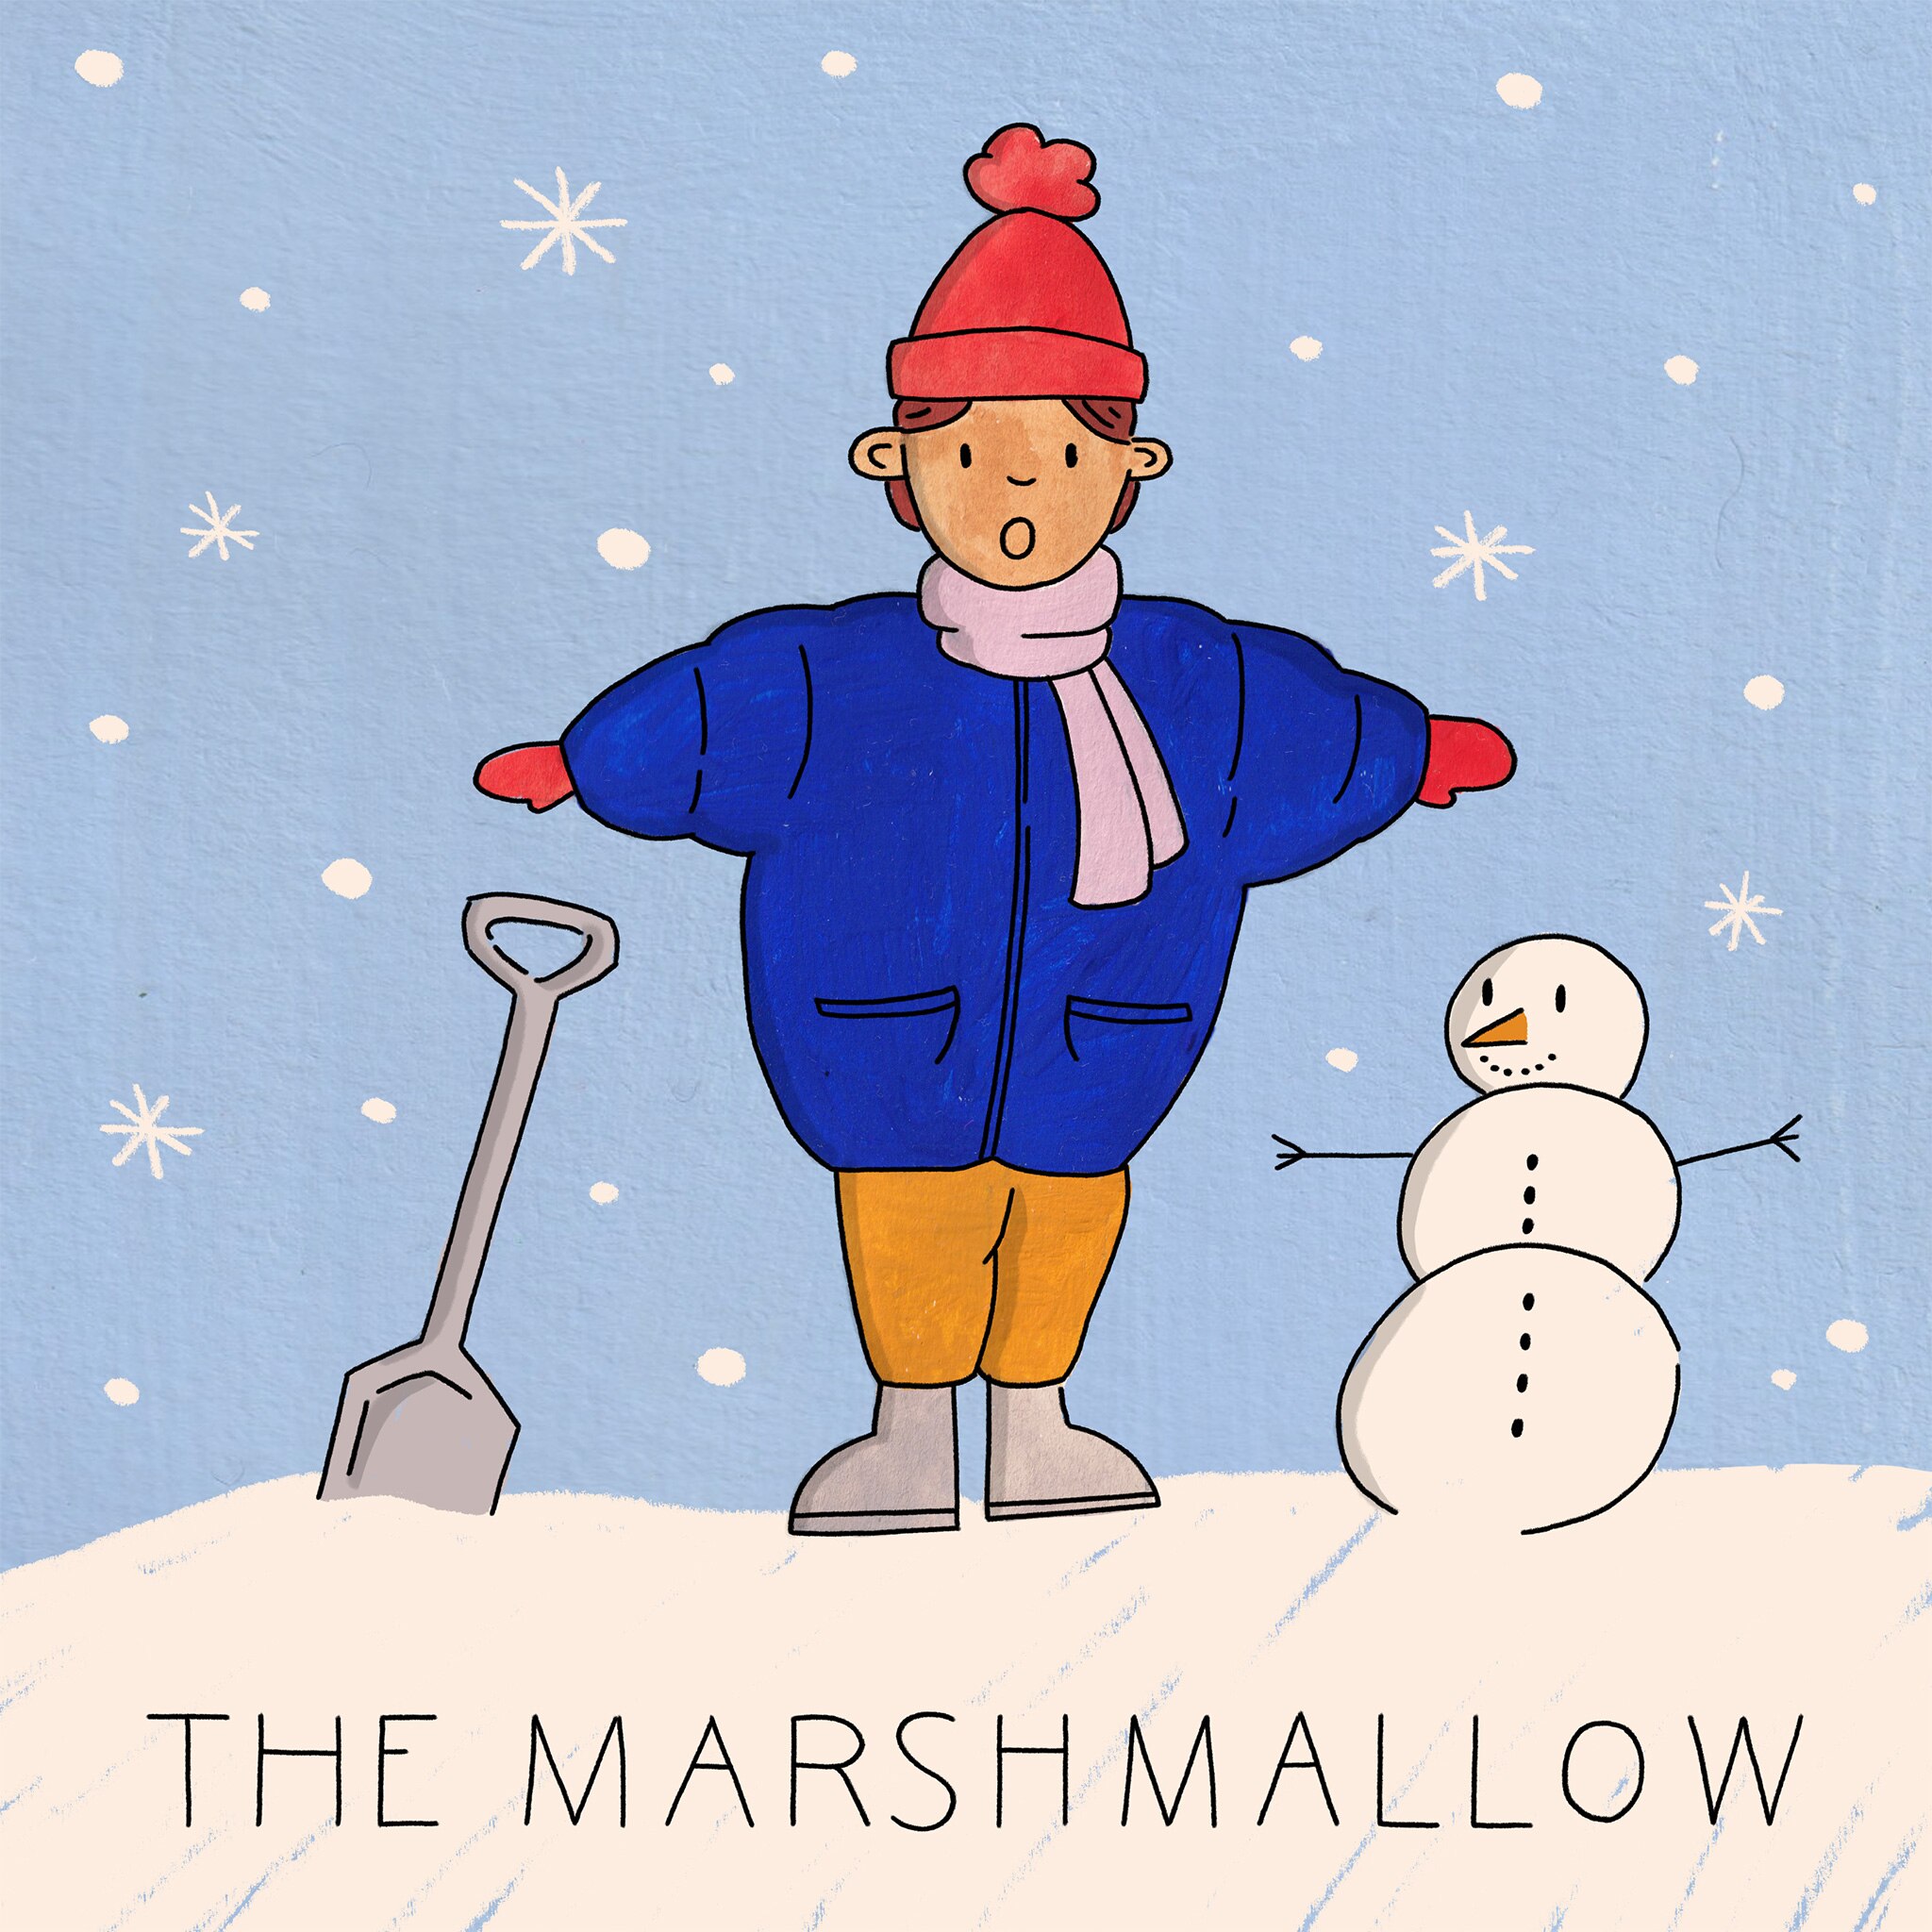 A girl in warm clothes with a snowman and shovel. Text: The Marshmallow